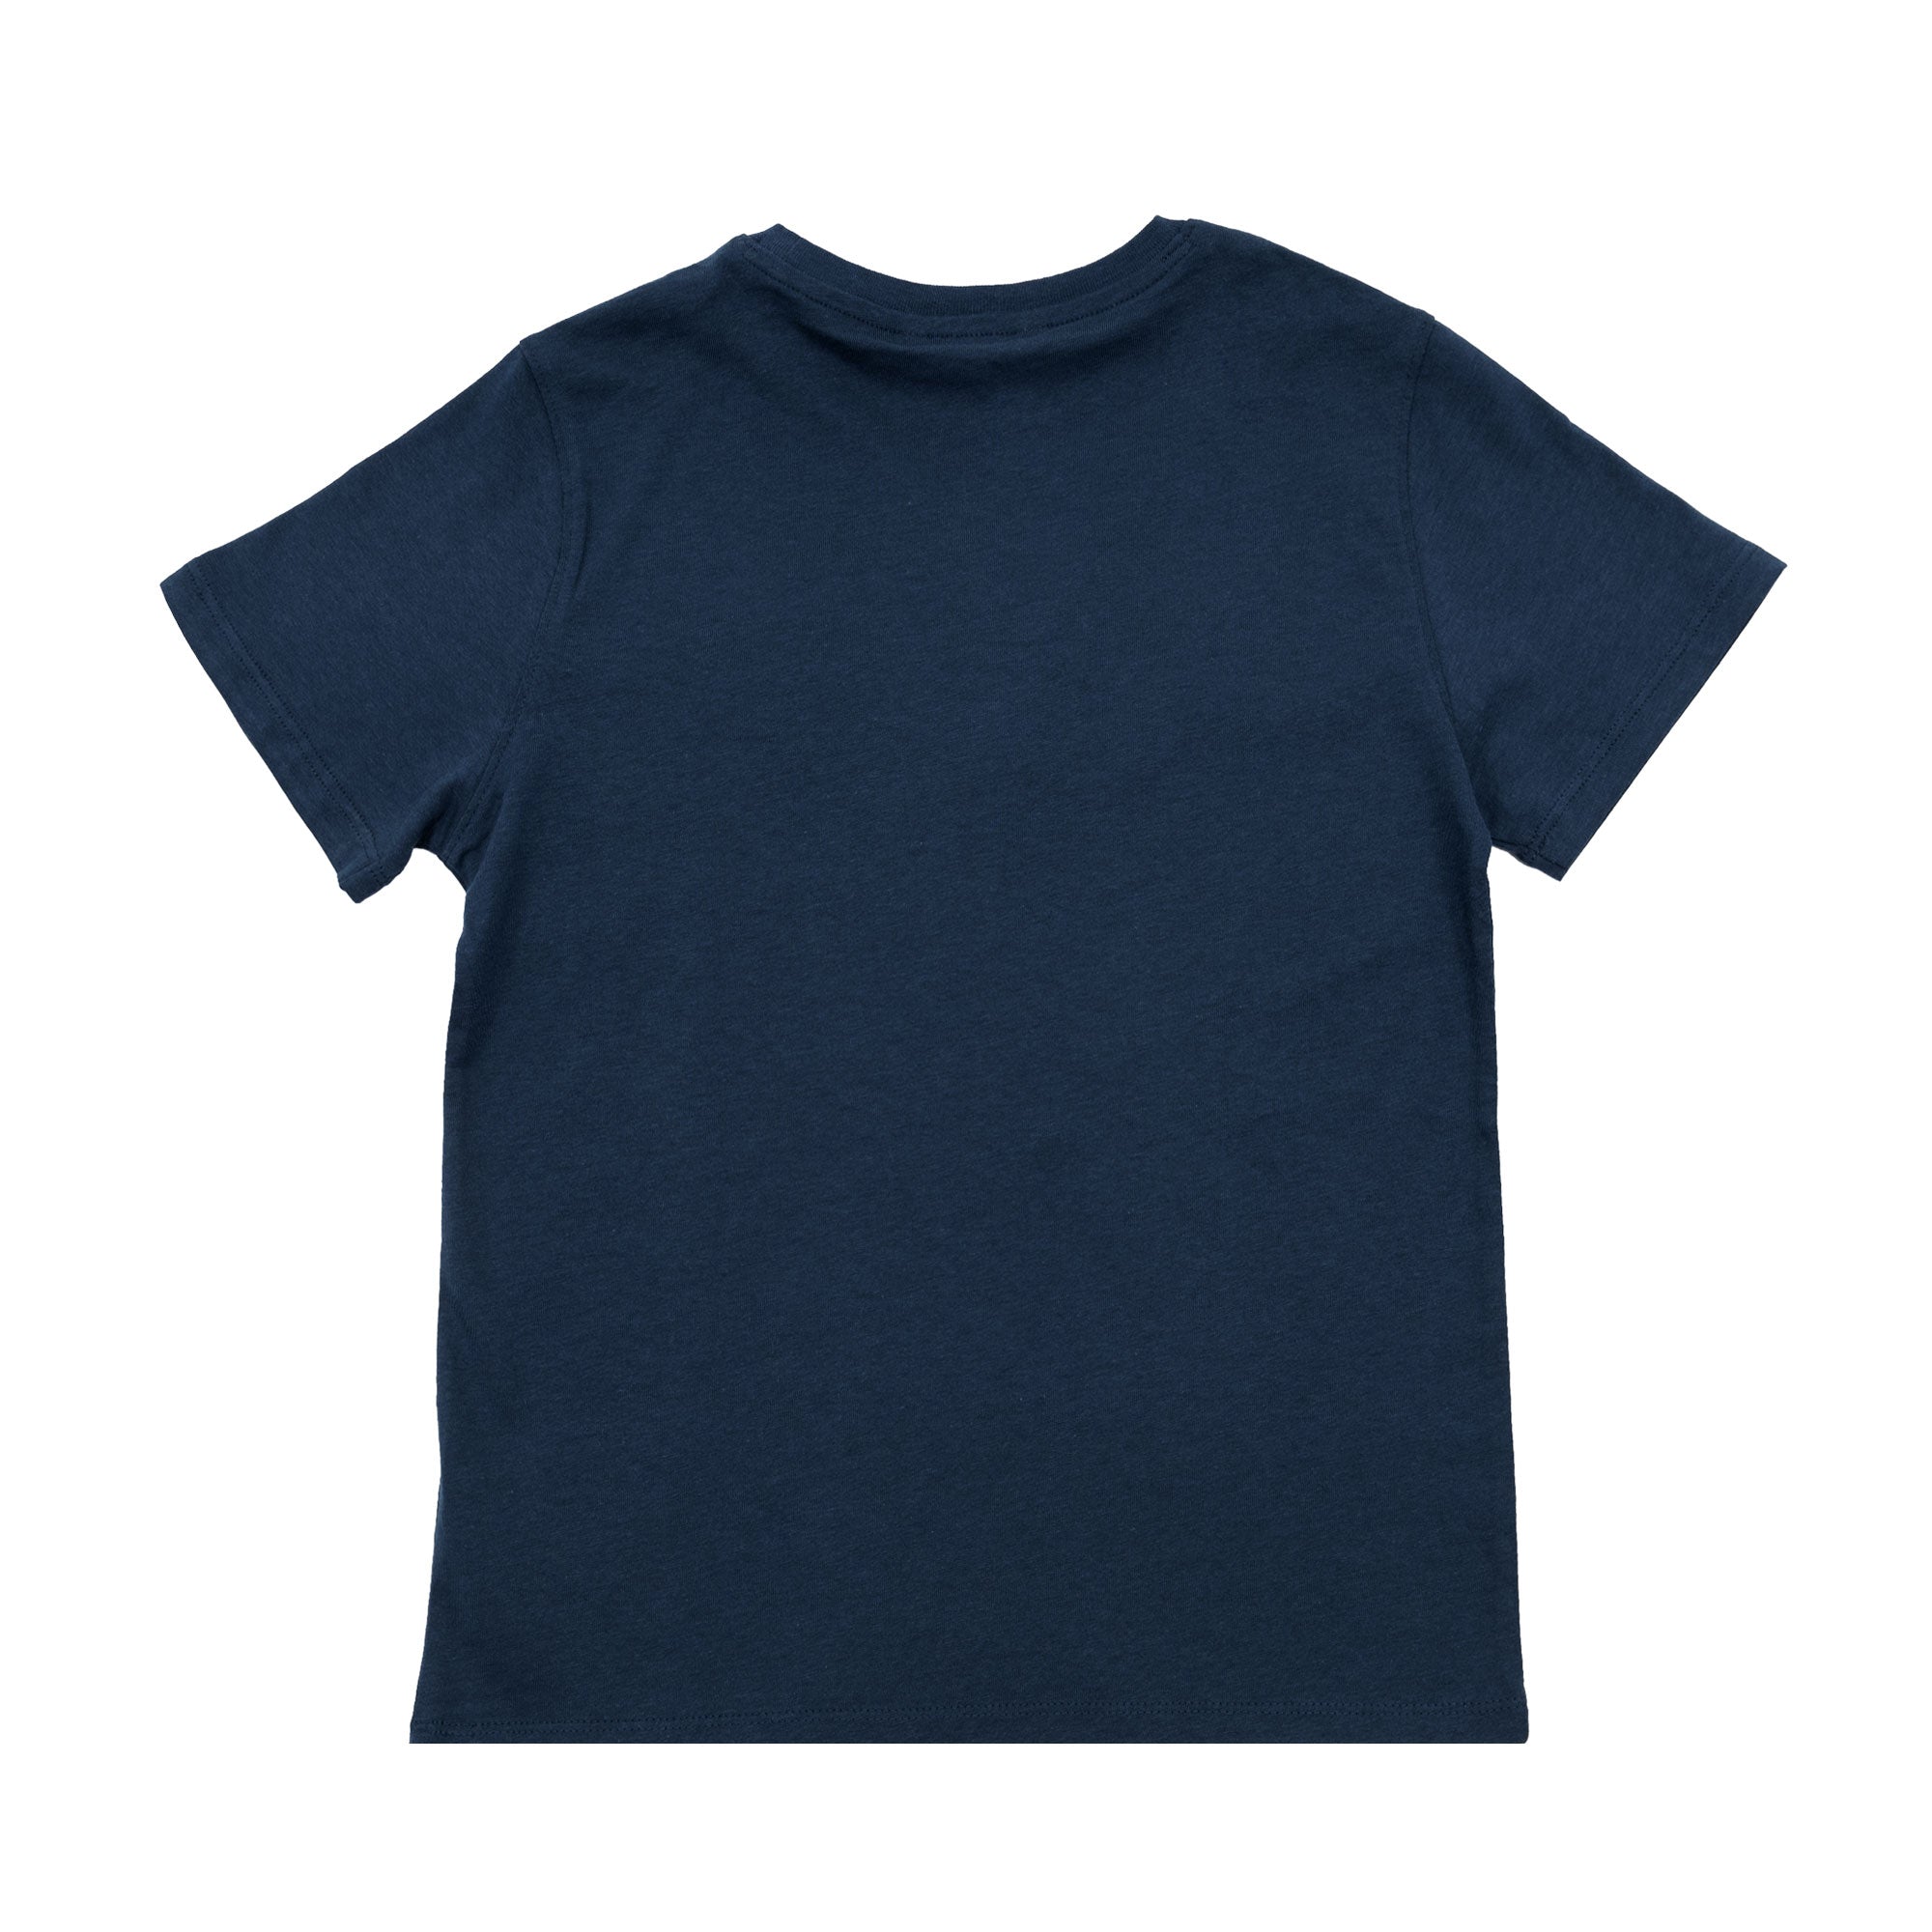 Boys Cotton T-Shirt: Essential Comfort and Style in One